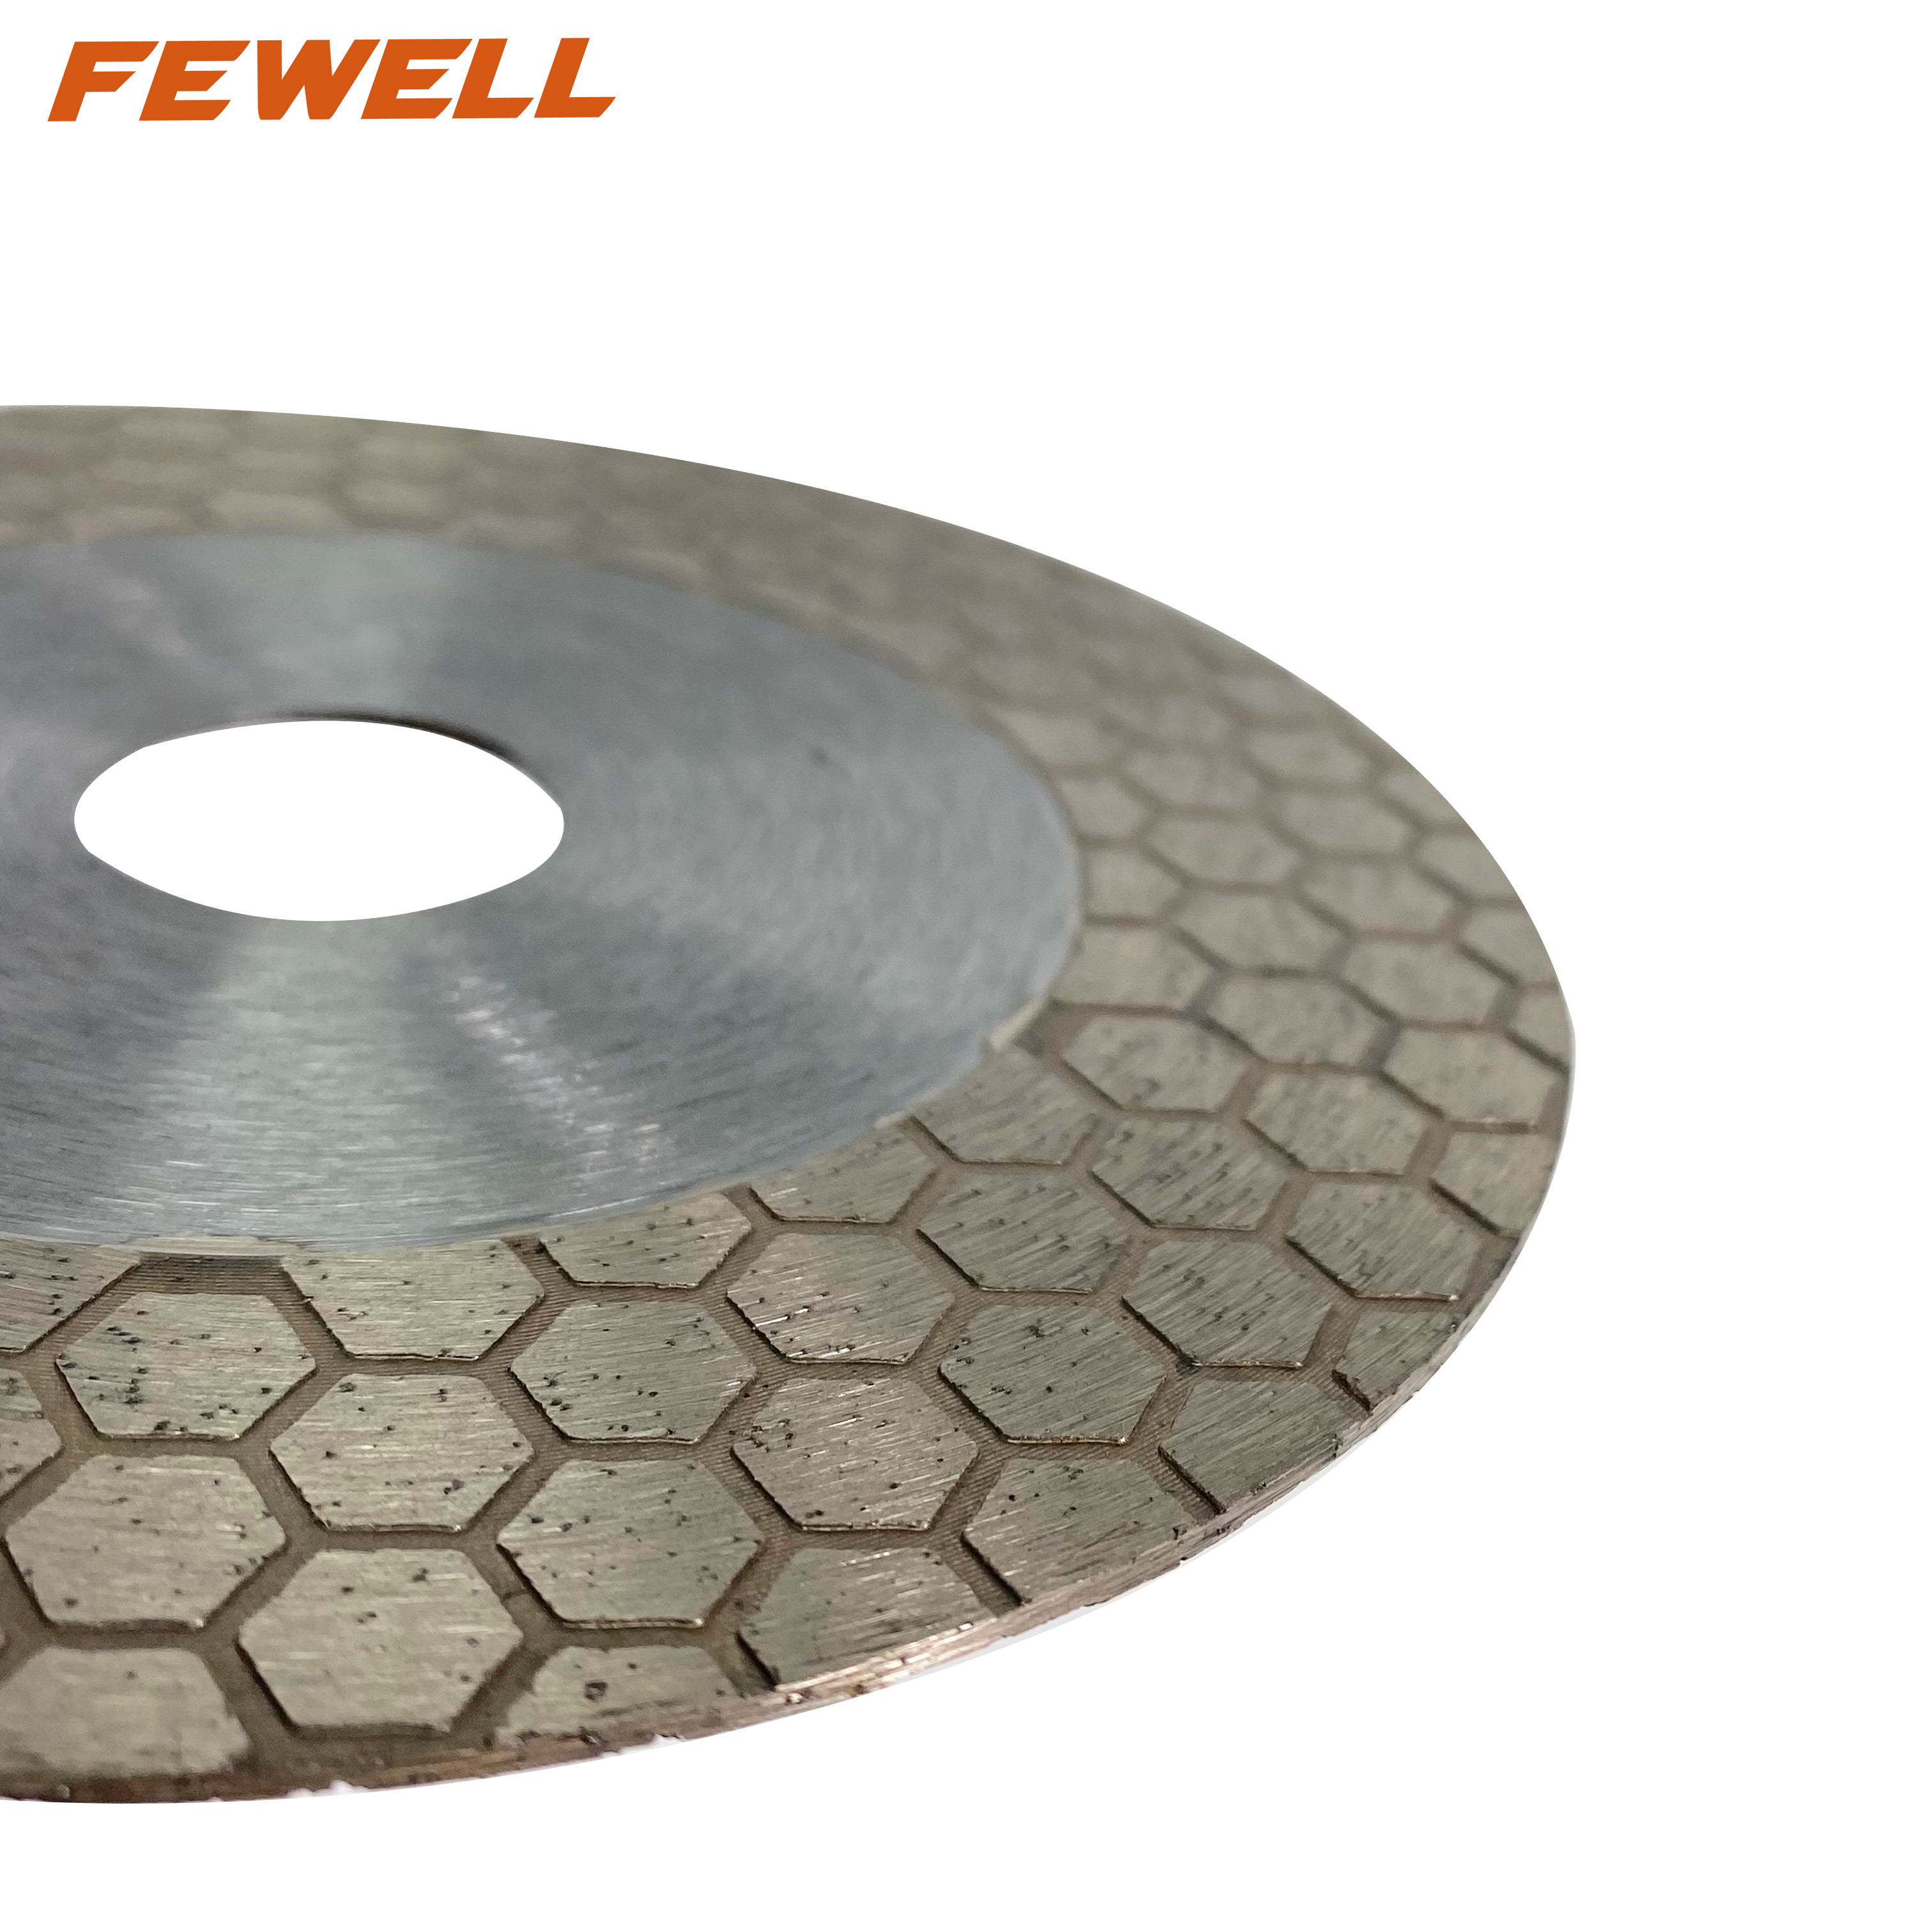 High quality 5in 150*1.5*25*22.23mm hot press diamond saw blade for cutting and grinding ceramic tile 